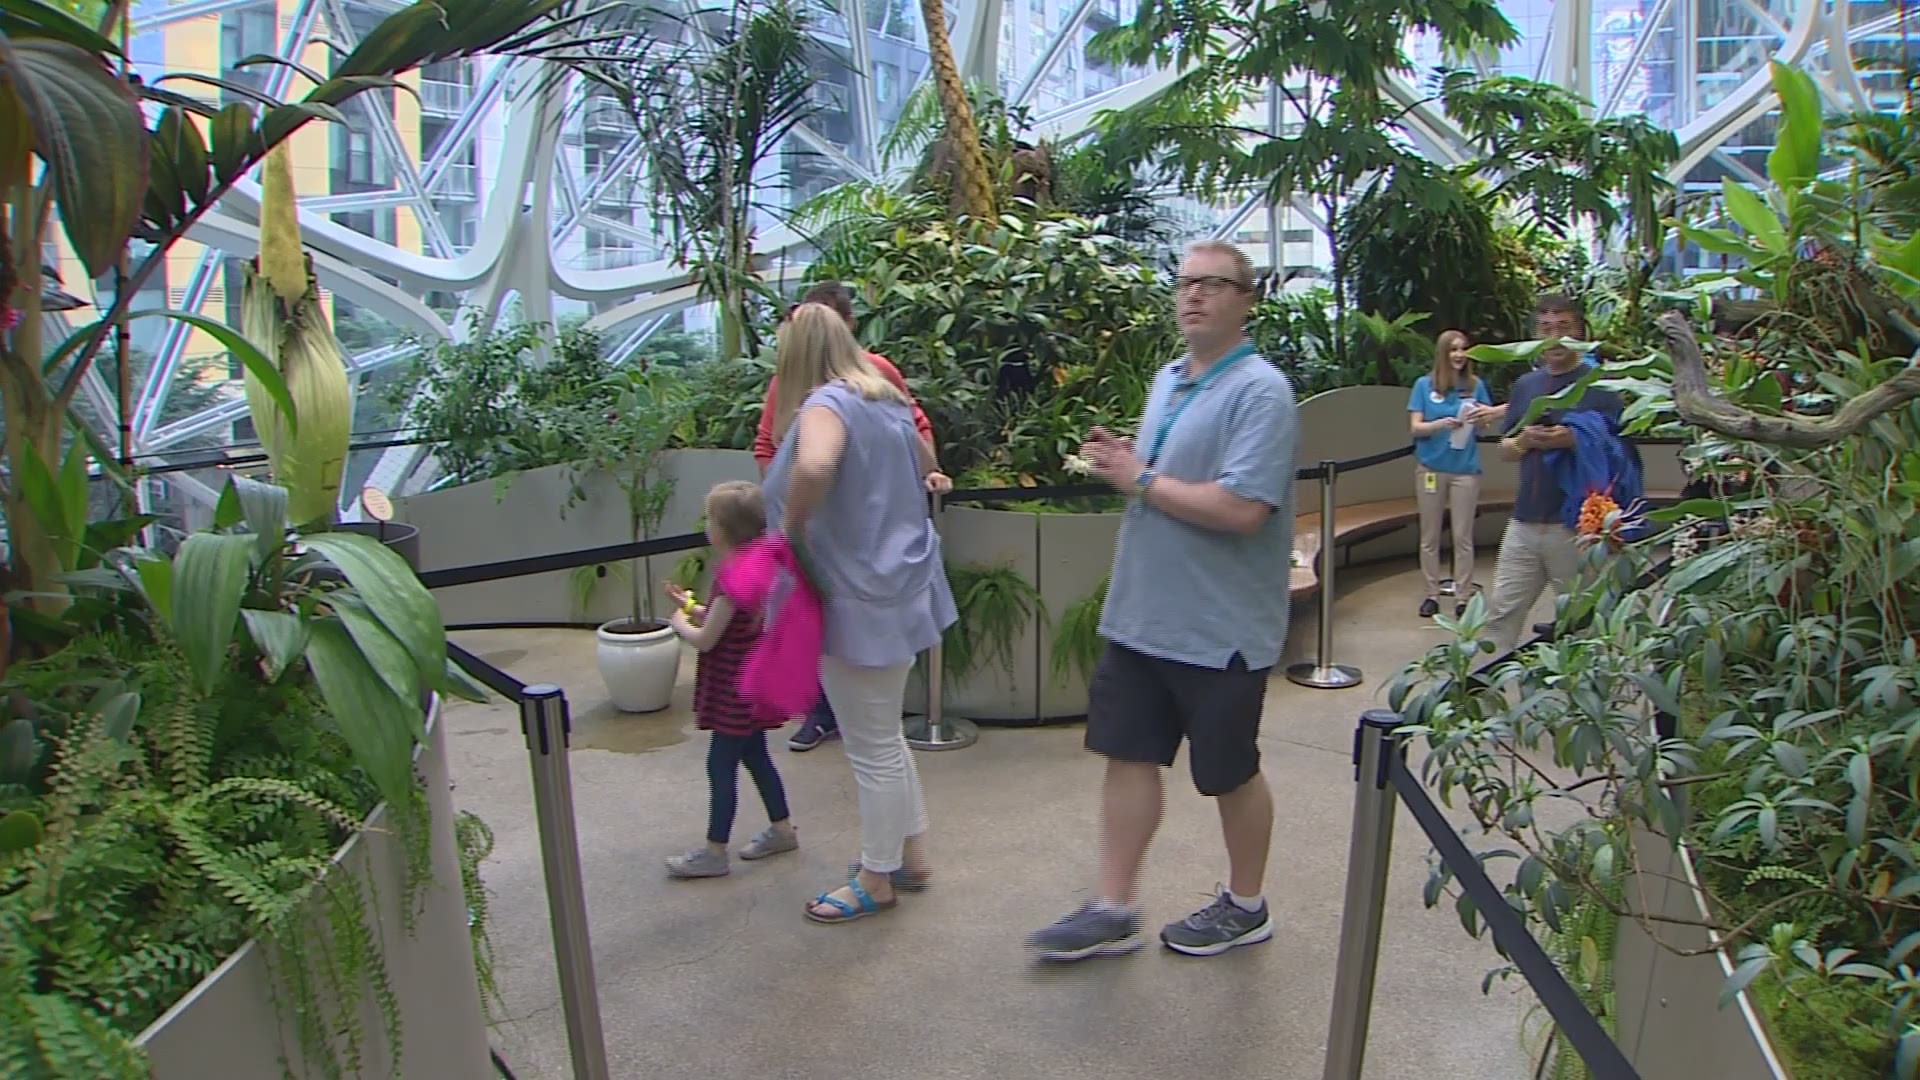 A corpse flower named Bellatrix is blooming at Seattle's Amazon Spheres.